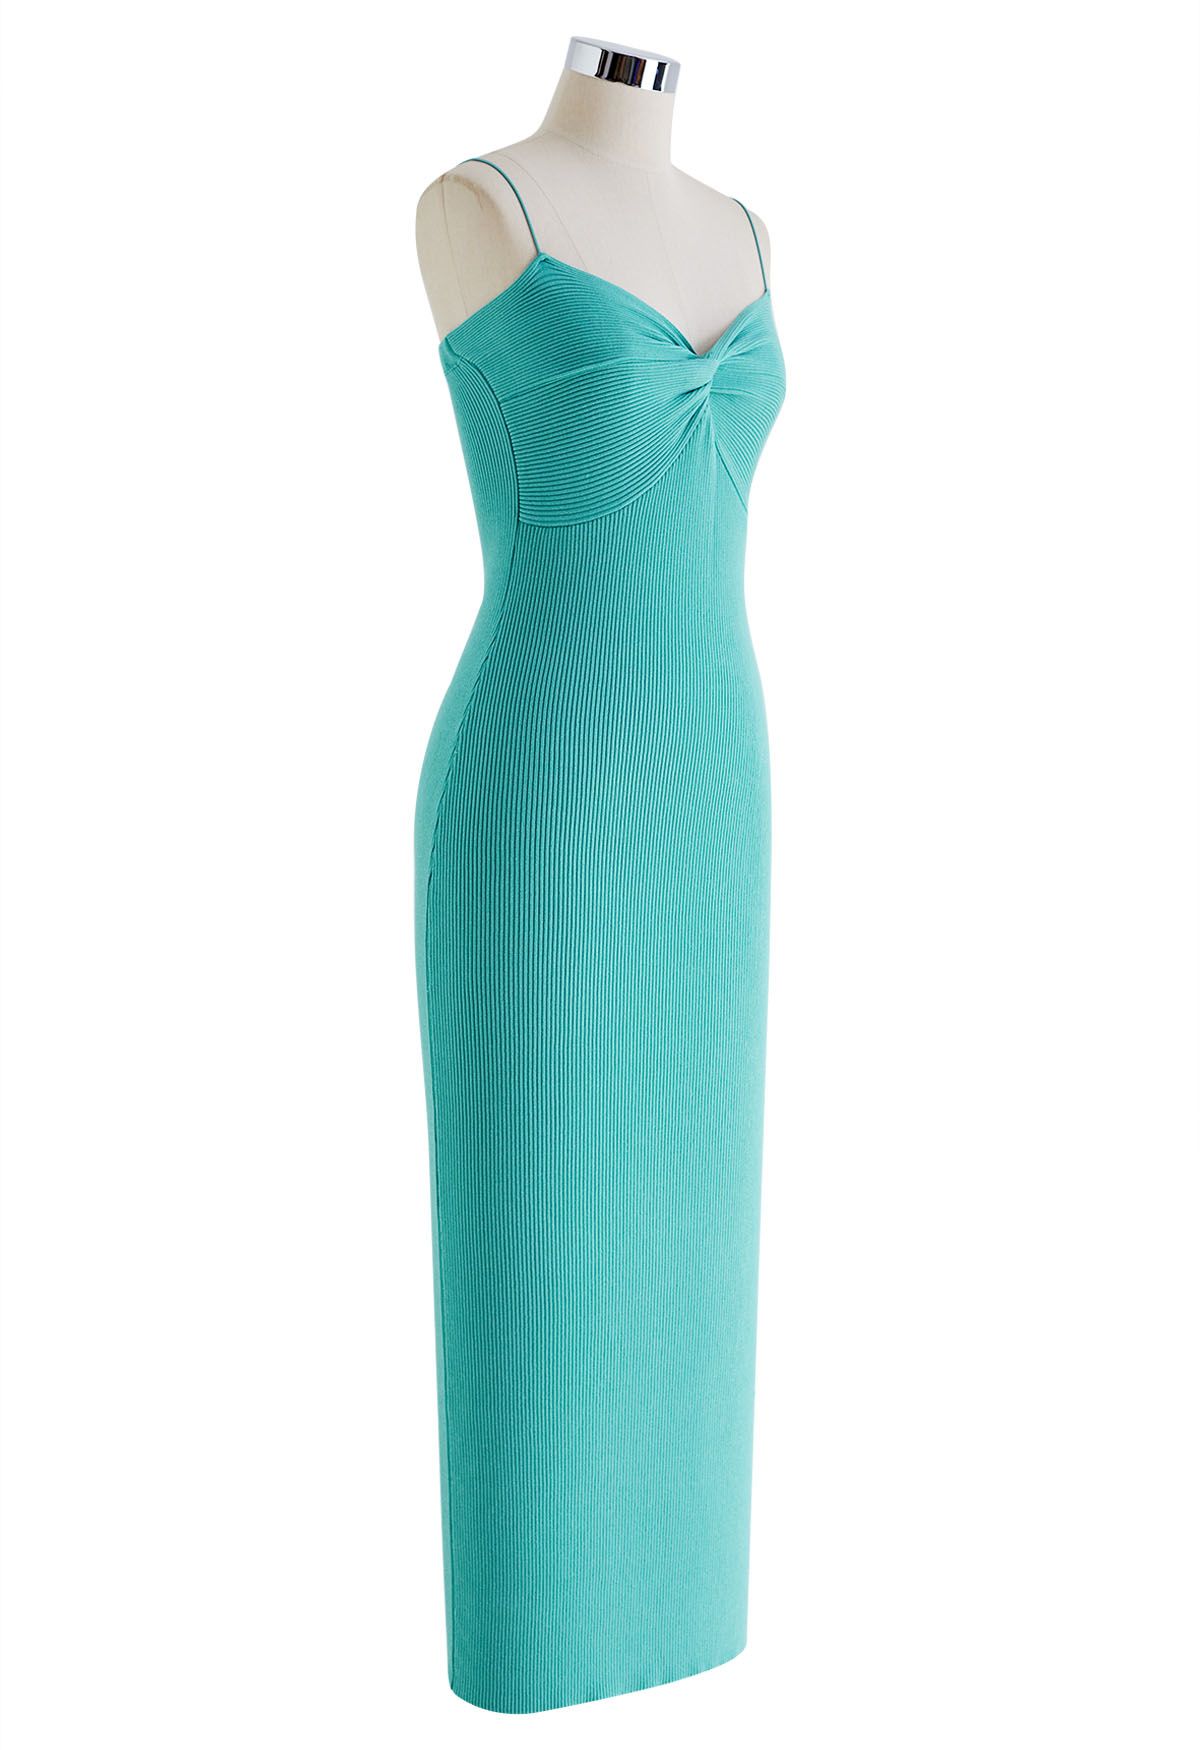 Twist Front Bodycon Knit Cami Dress in Turquoise